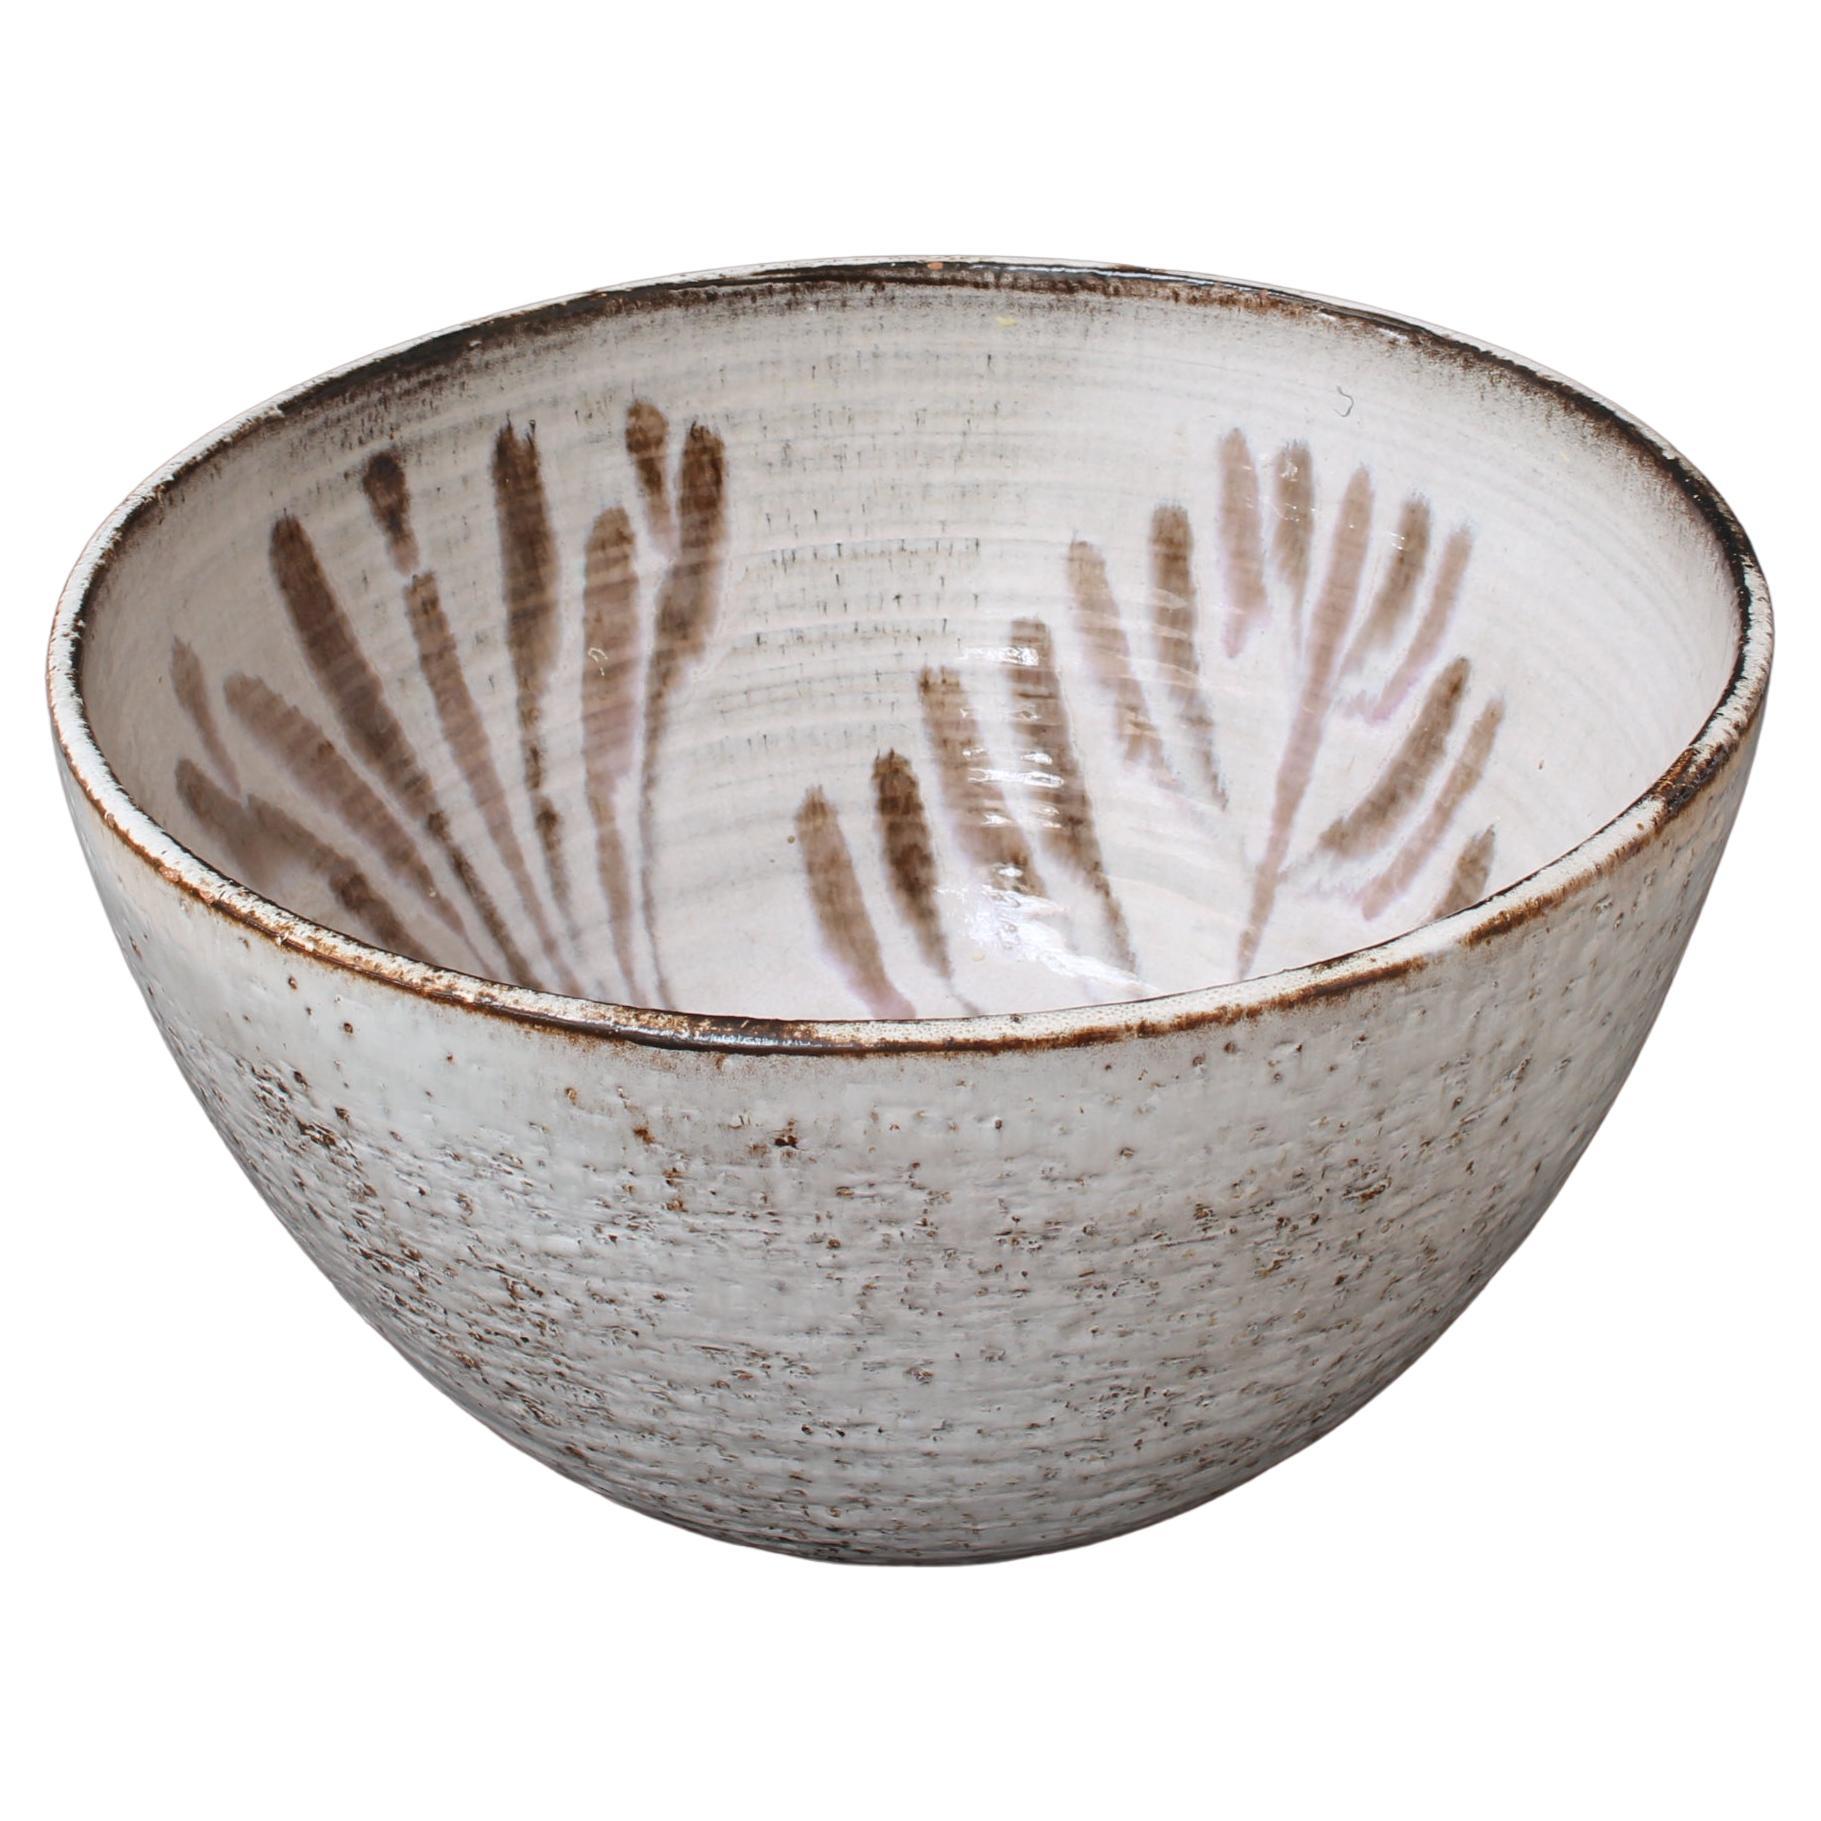 Vintage French ceramic bowl by Gérard Hofmann (circa 1950s). Exquisitely decorated with an interior plant motif in an earthy, enamelled brown, this sizeable bowl makes a statement in the kitchen or on display in another room. Not only is it visually